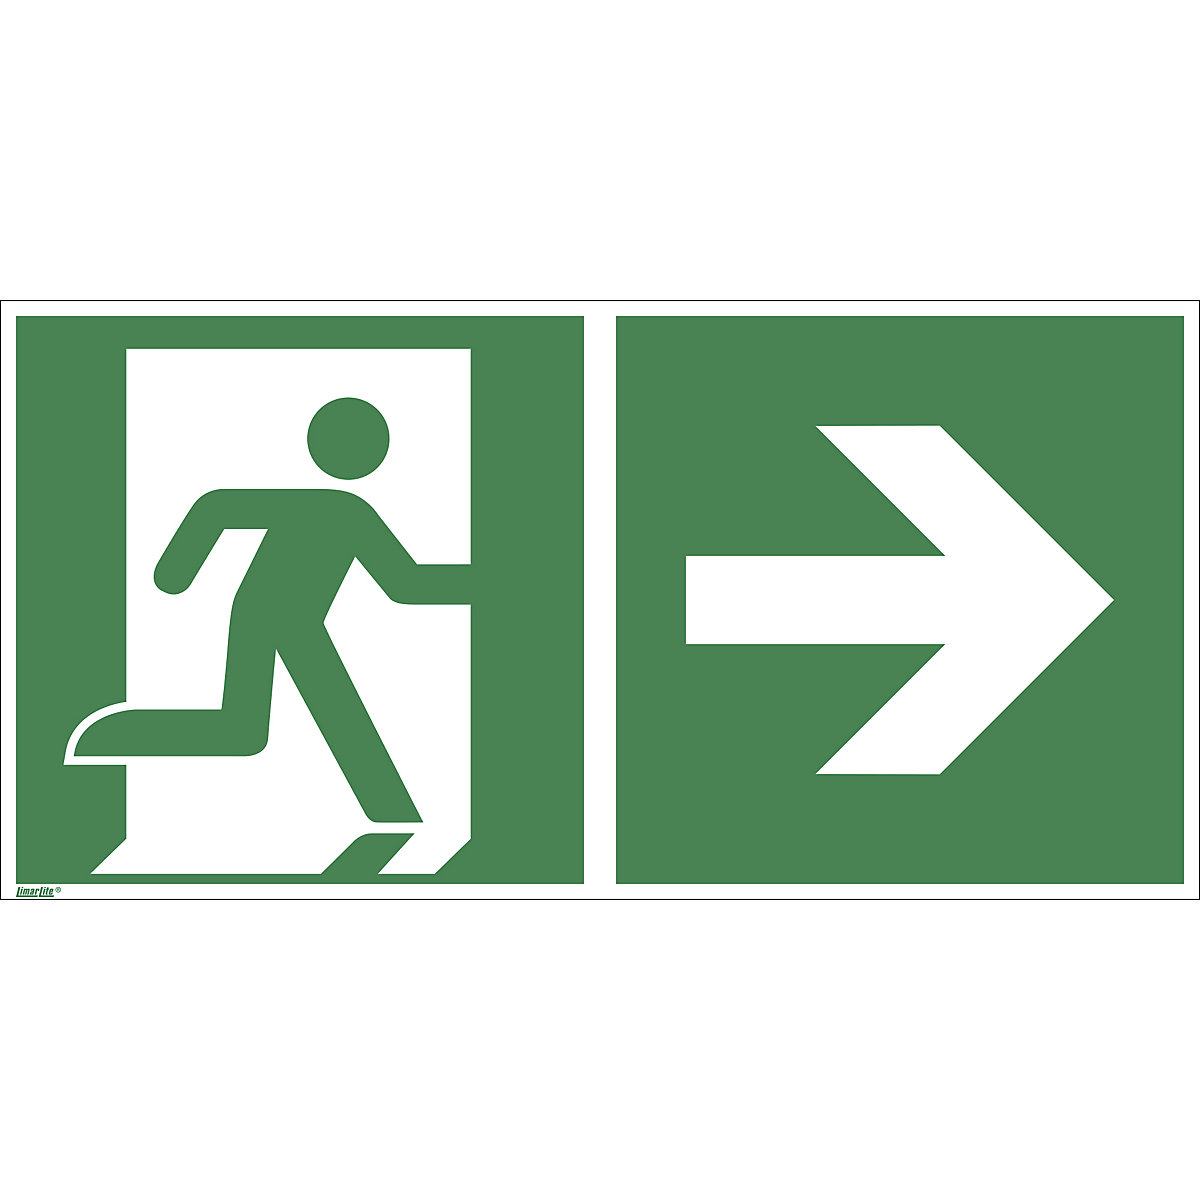 Emergency exit signs